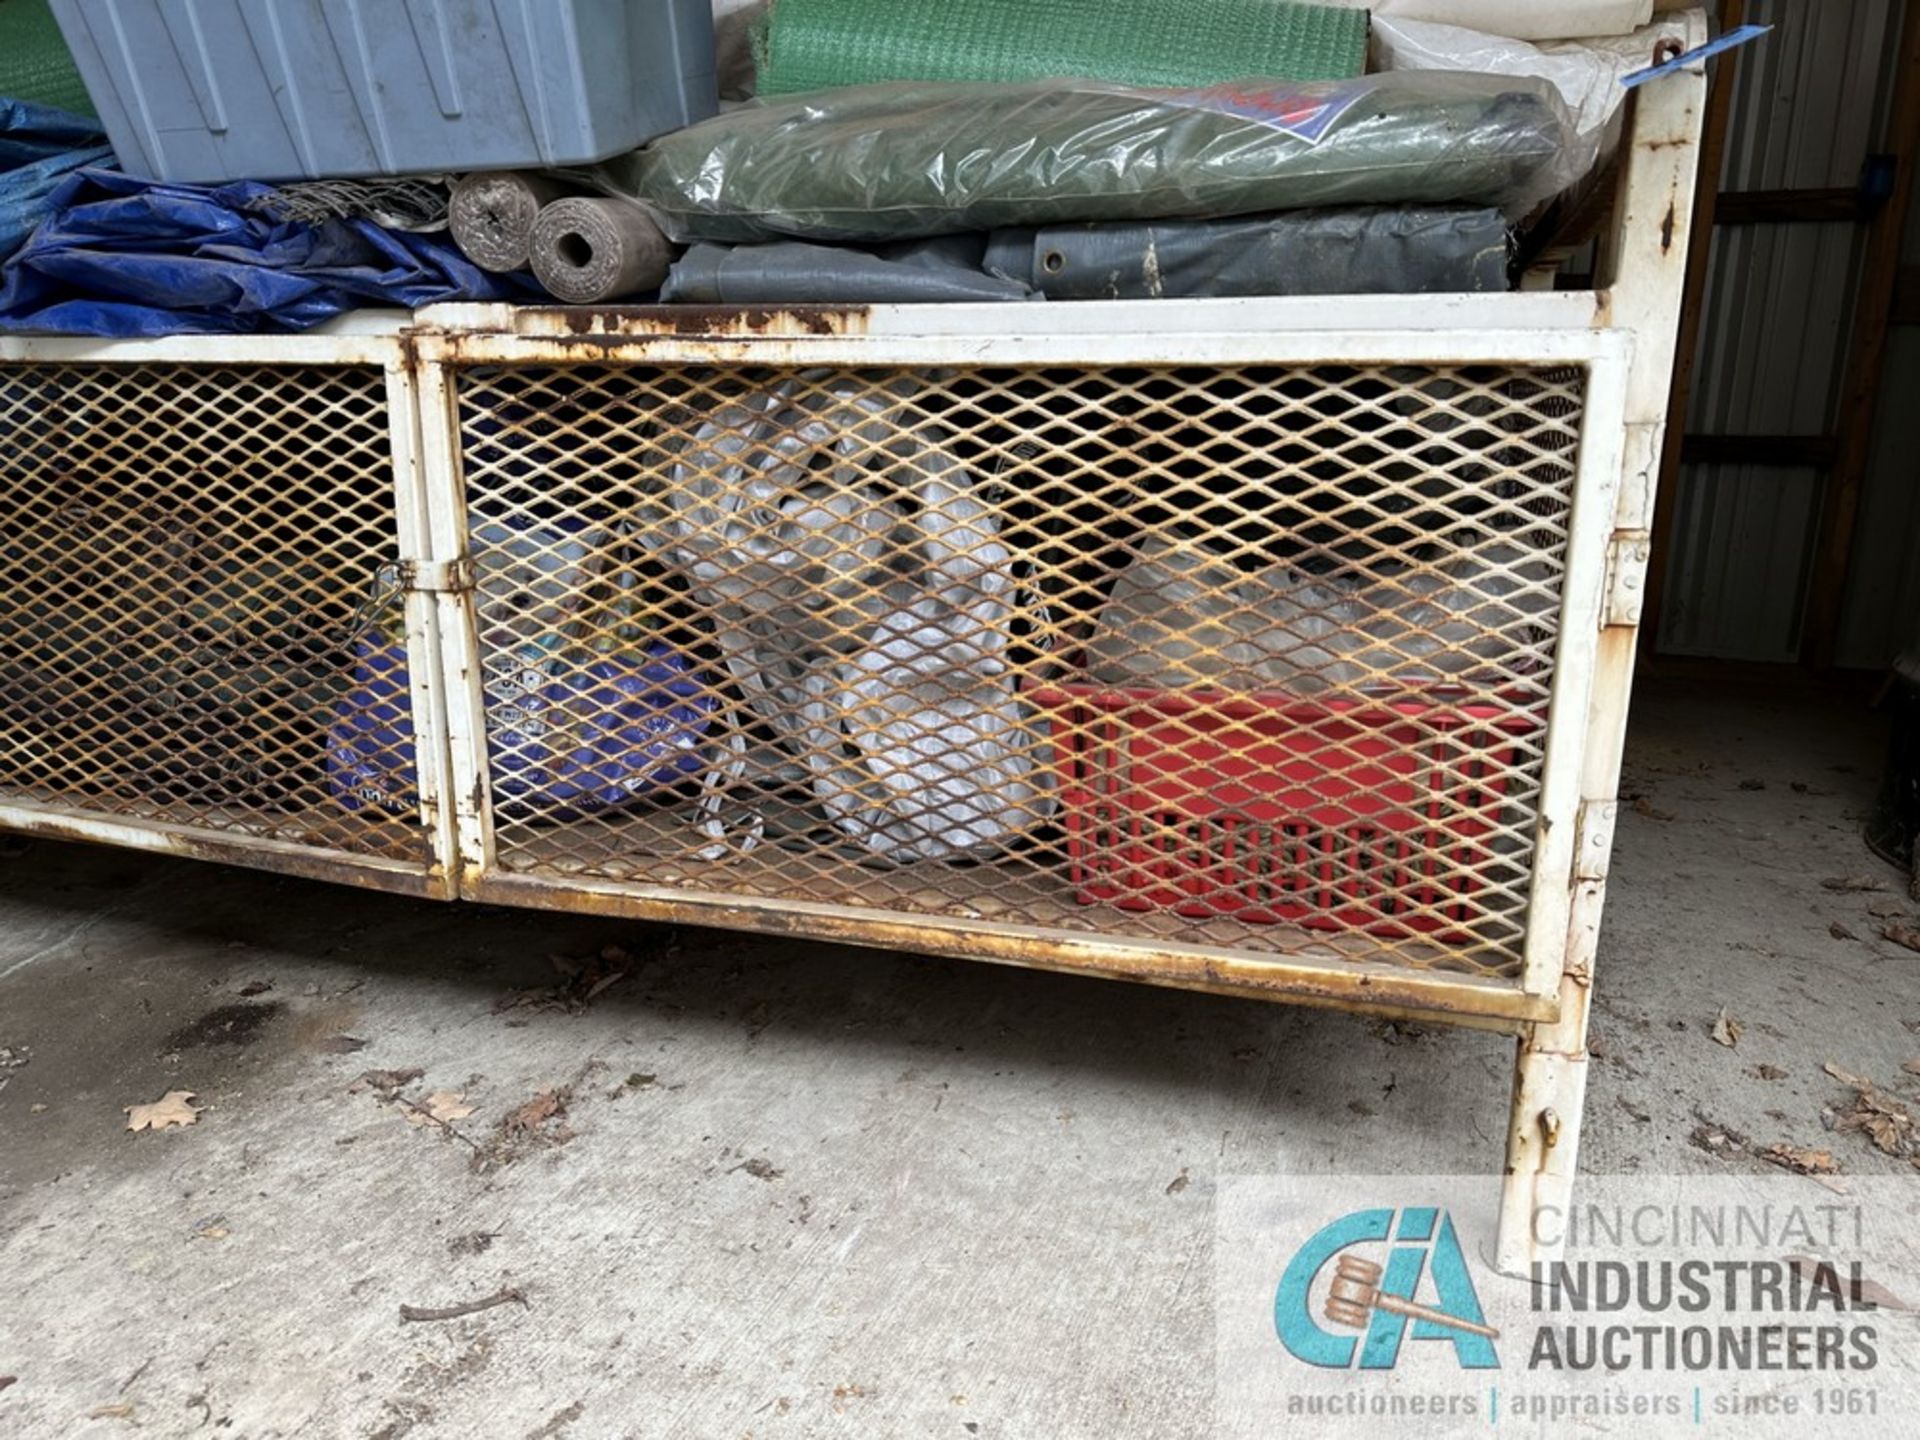 STEEL WIRE GRATED STORAGE BOX WITH MISCELLANEOUS TARPS *LOCATED IN SHED AT REAR OF BUILDING* - Image 2 of 6